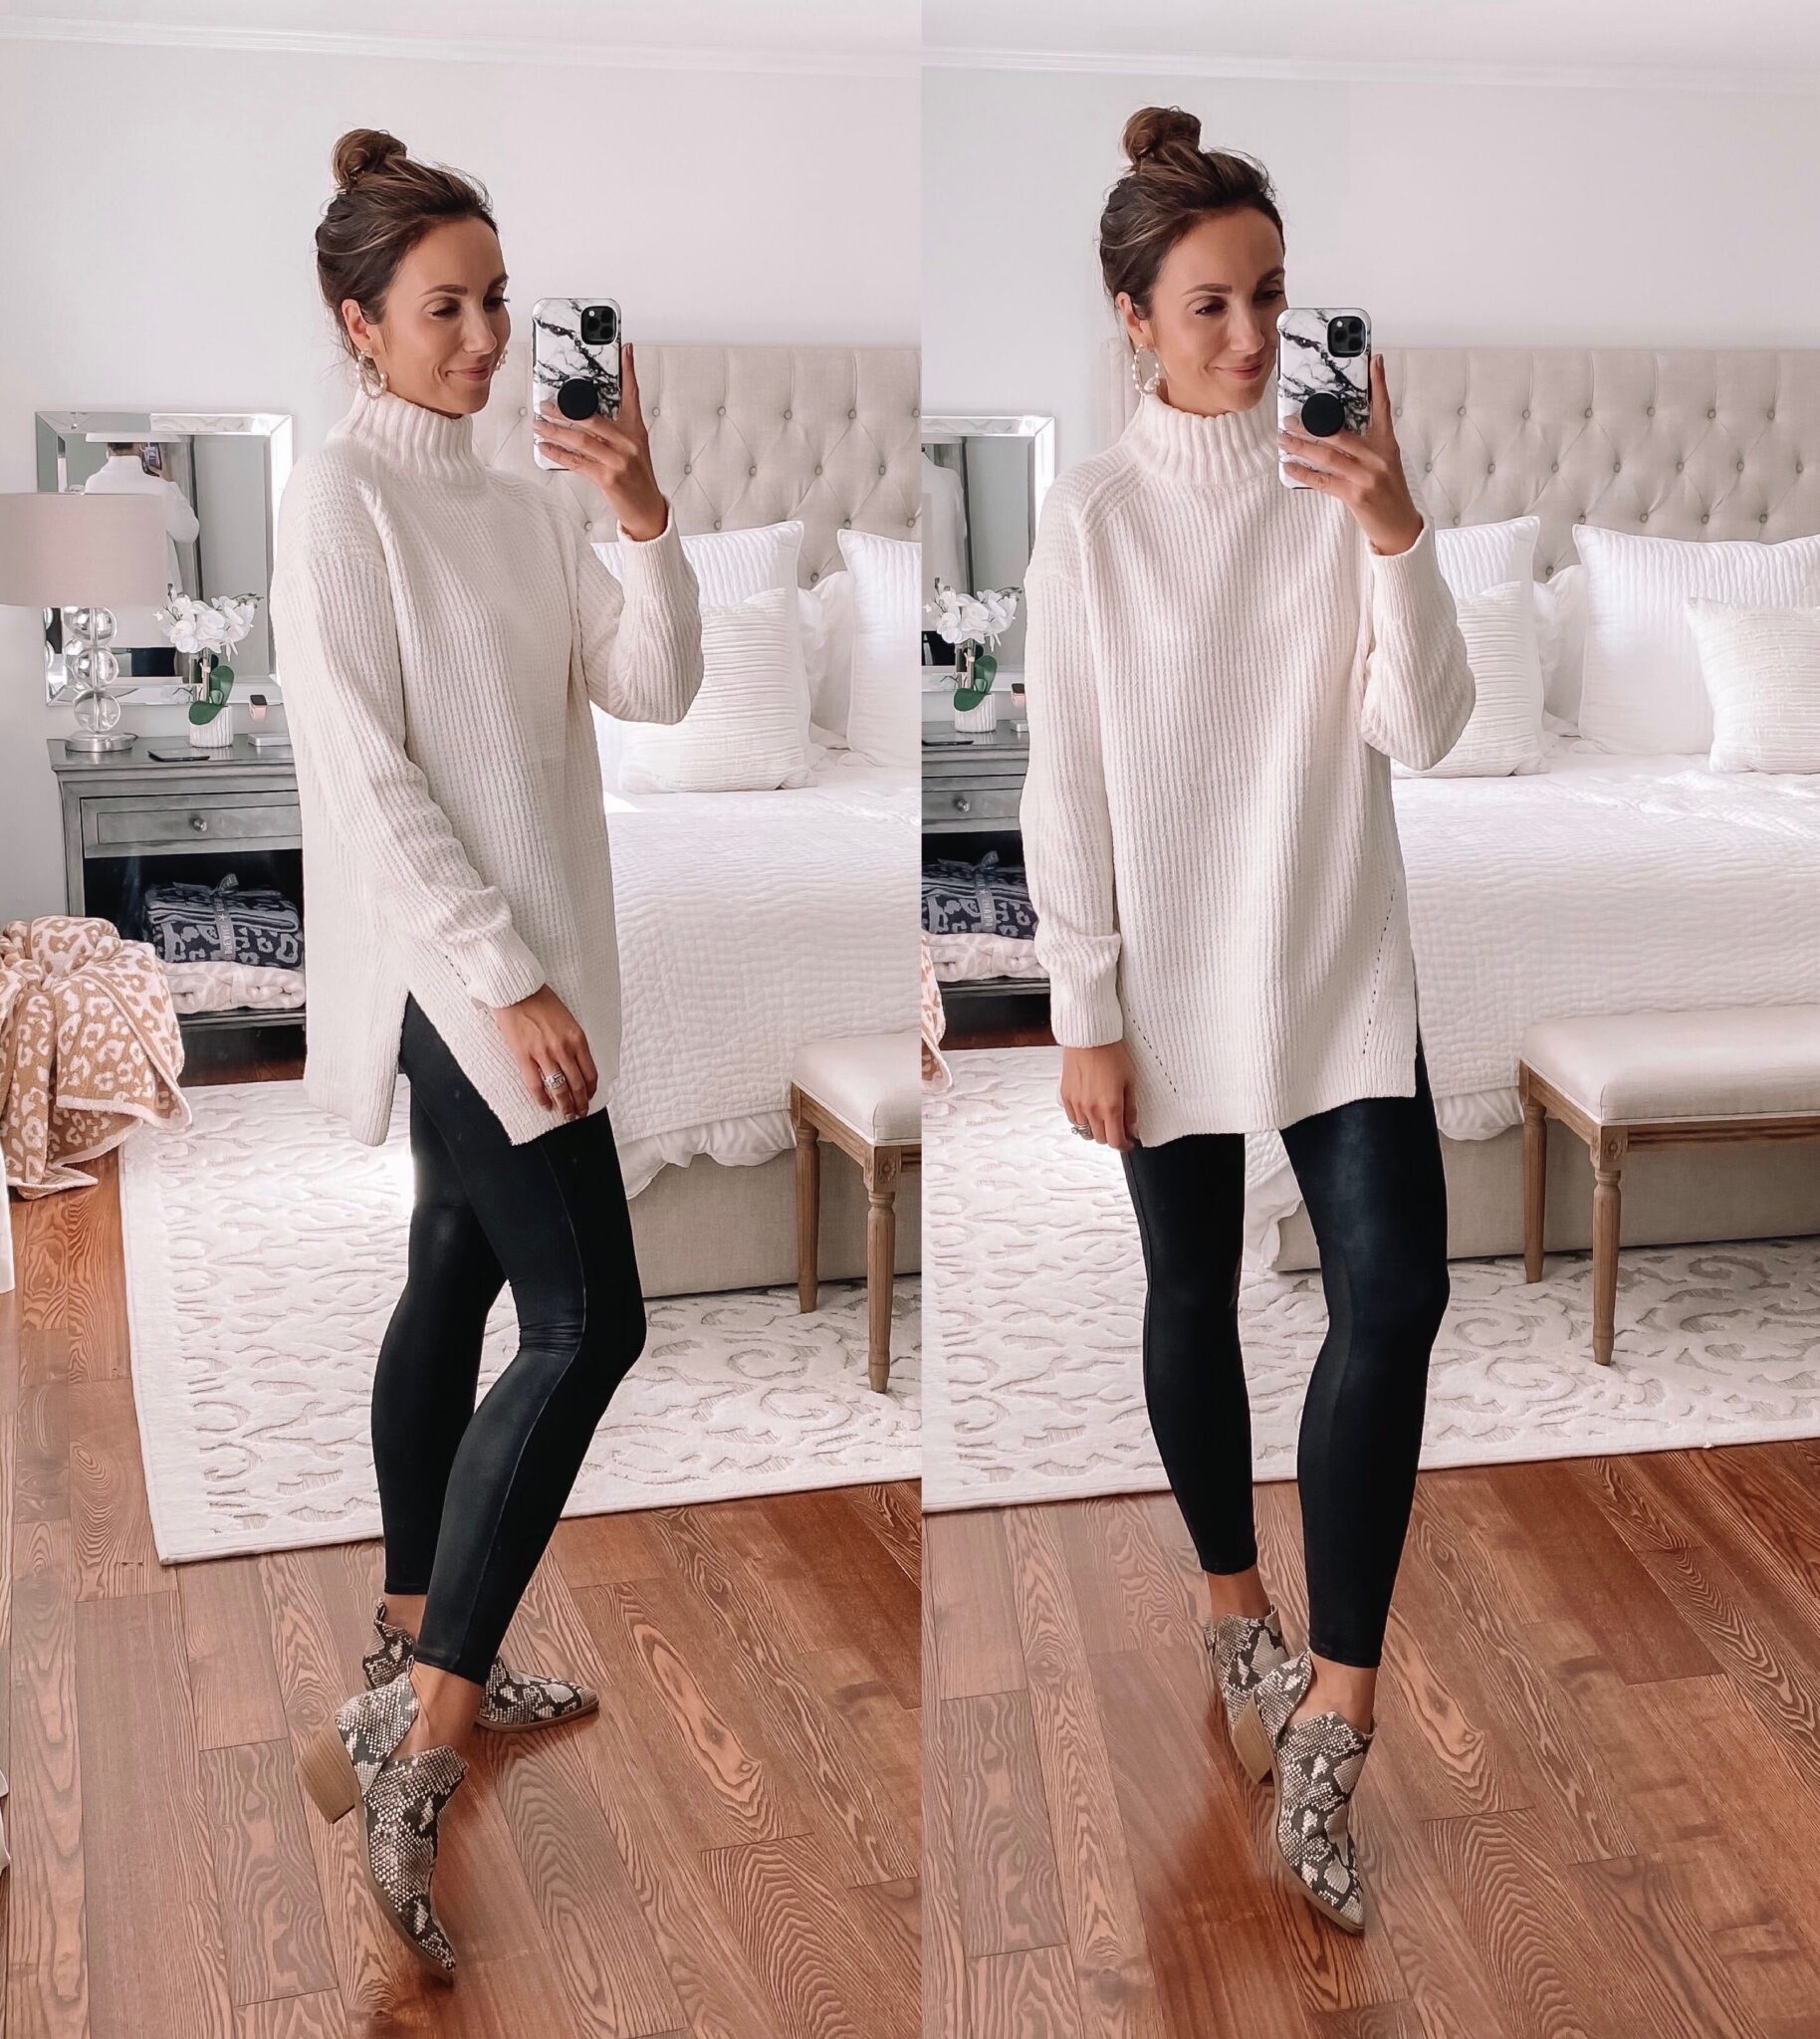 target sweater, faux leather leggings, fall outfit idea